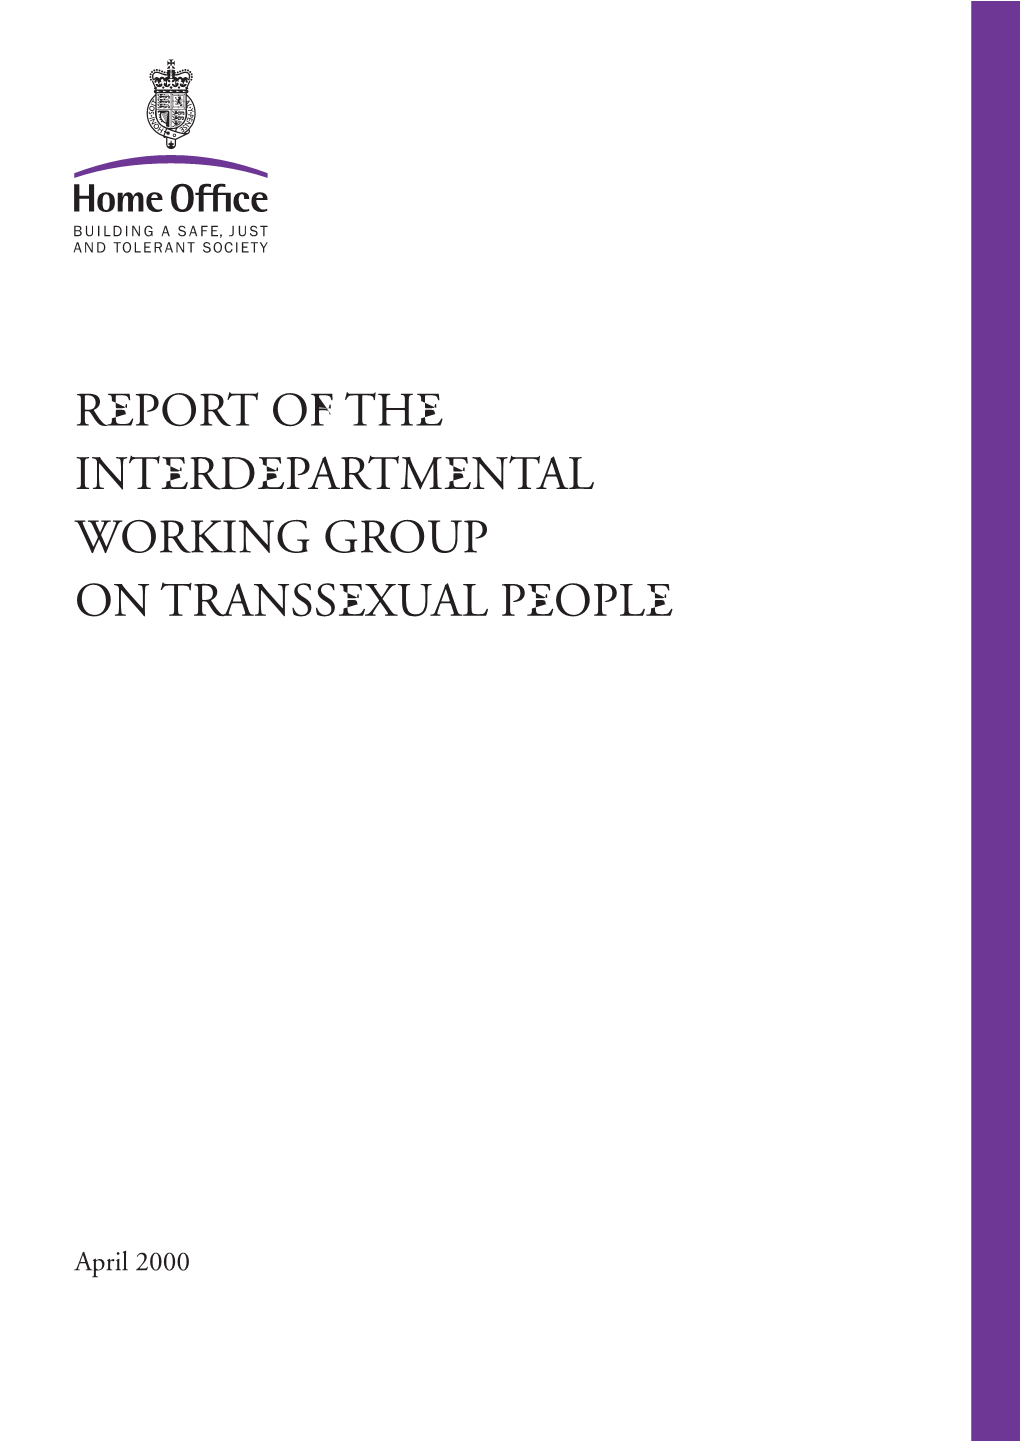 Report of the Interdepartmental Working Group on Transsexual People